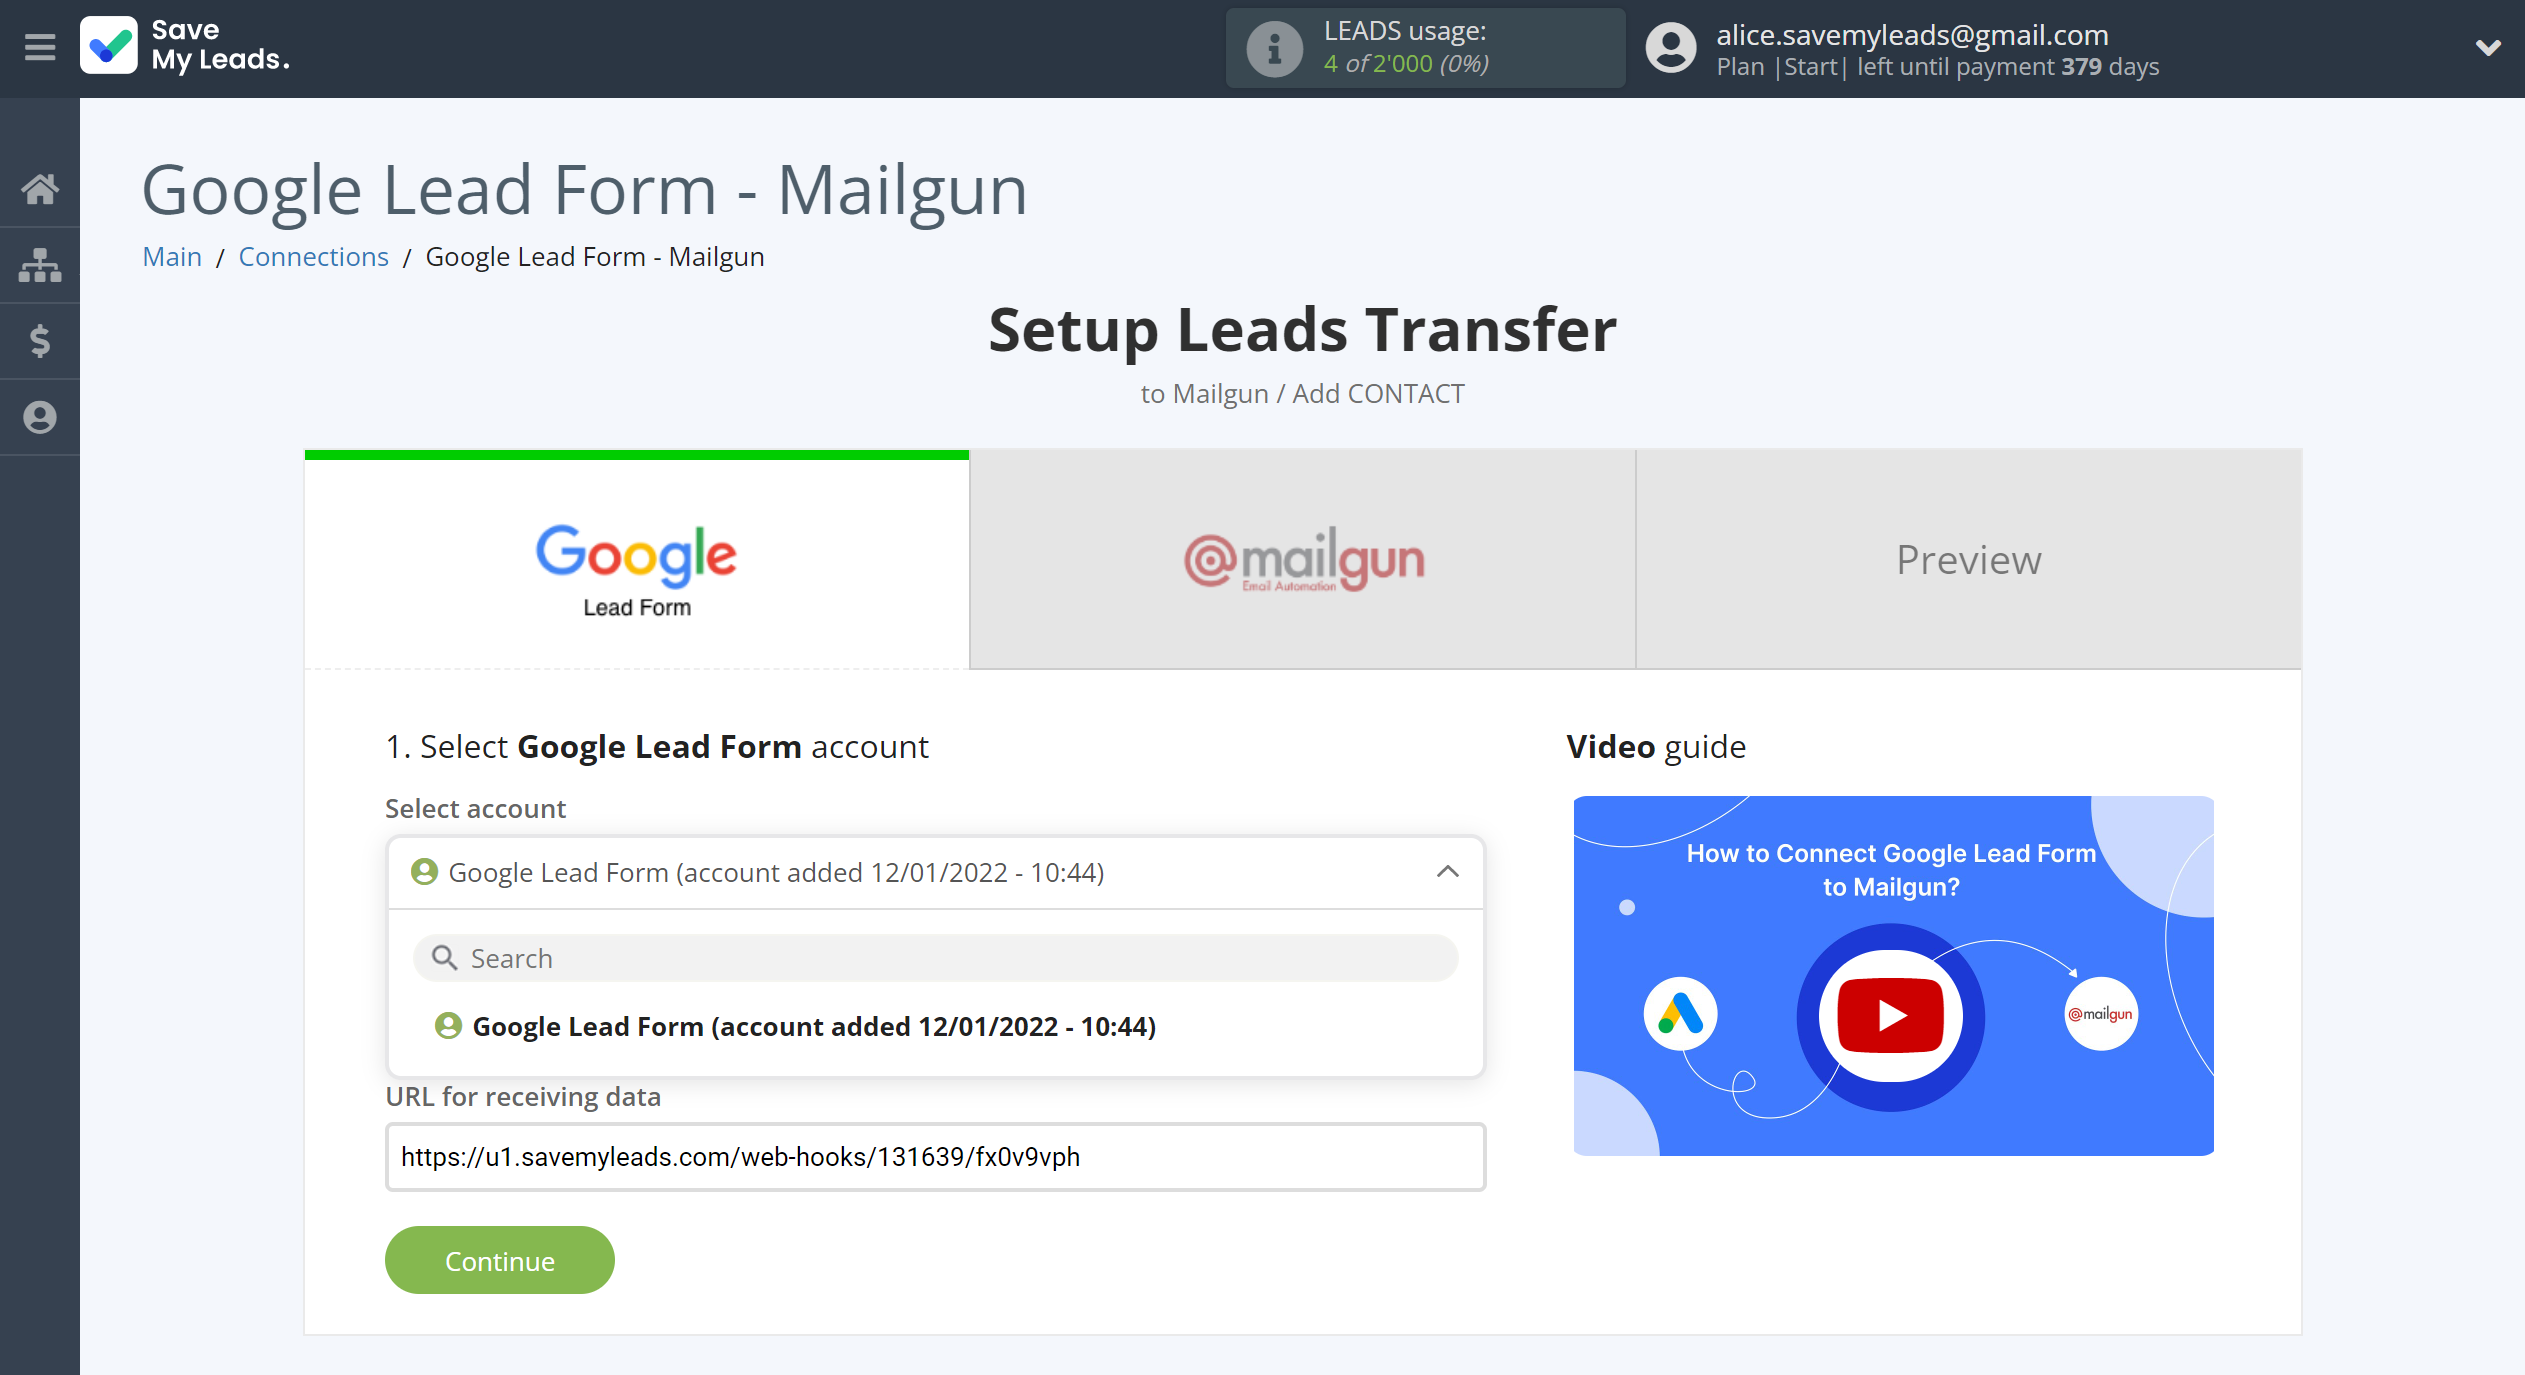 How to Connect Google Lead Form with Mailgun | Data Source account selection